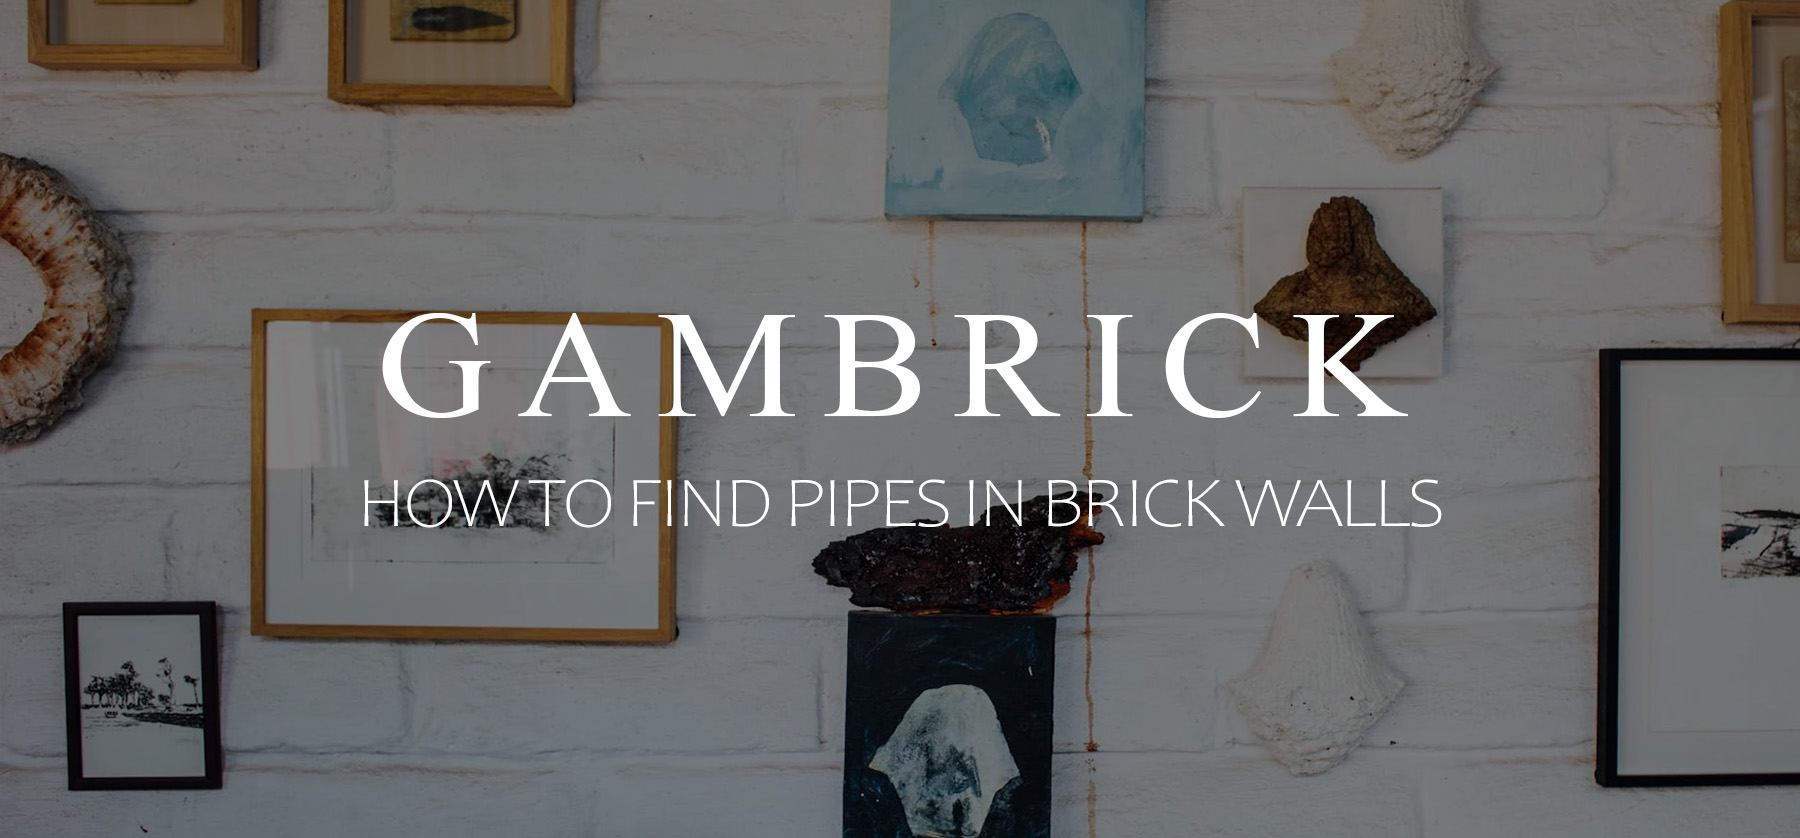 how to find pipes in brick walls banner 